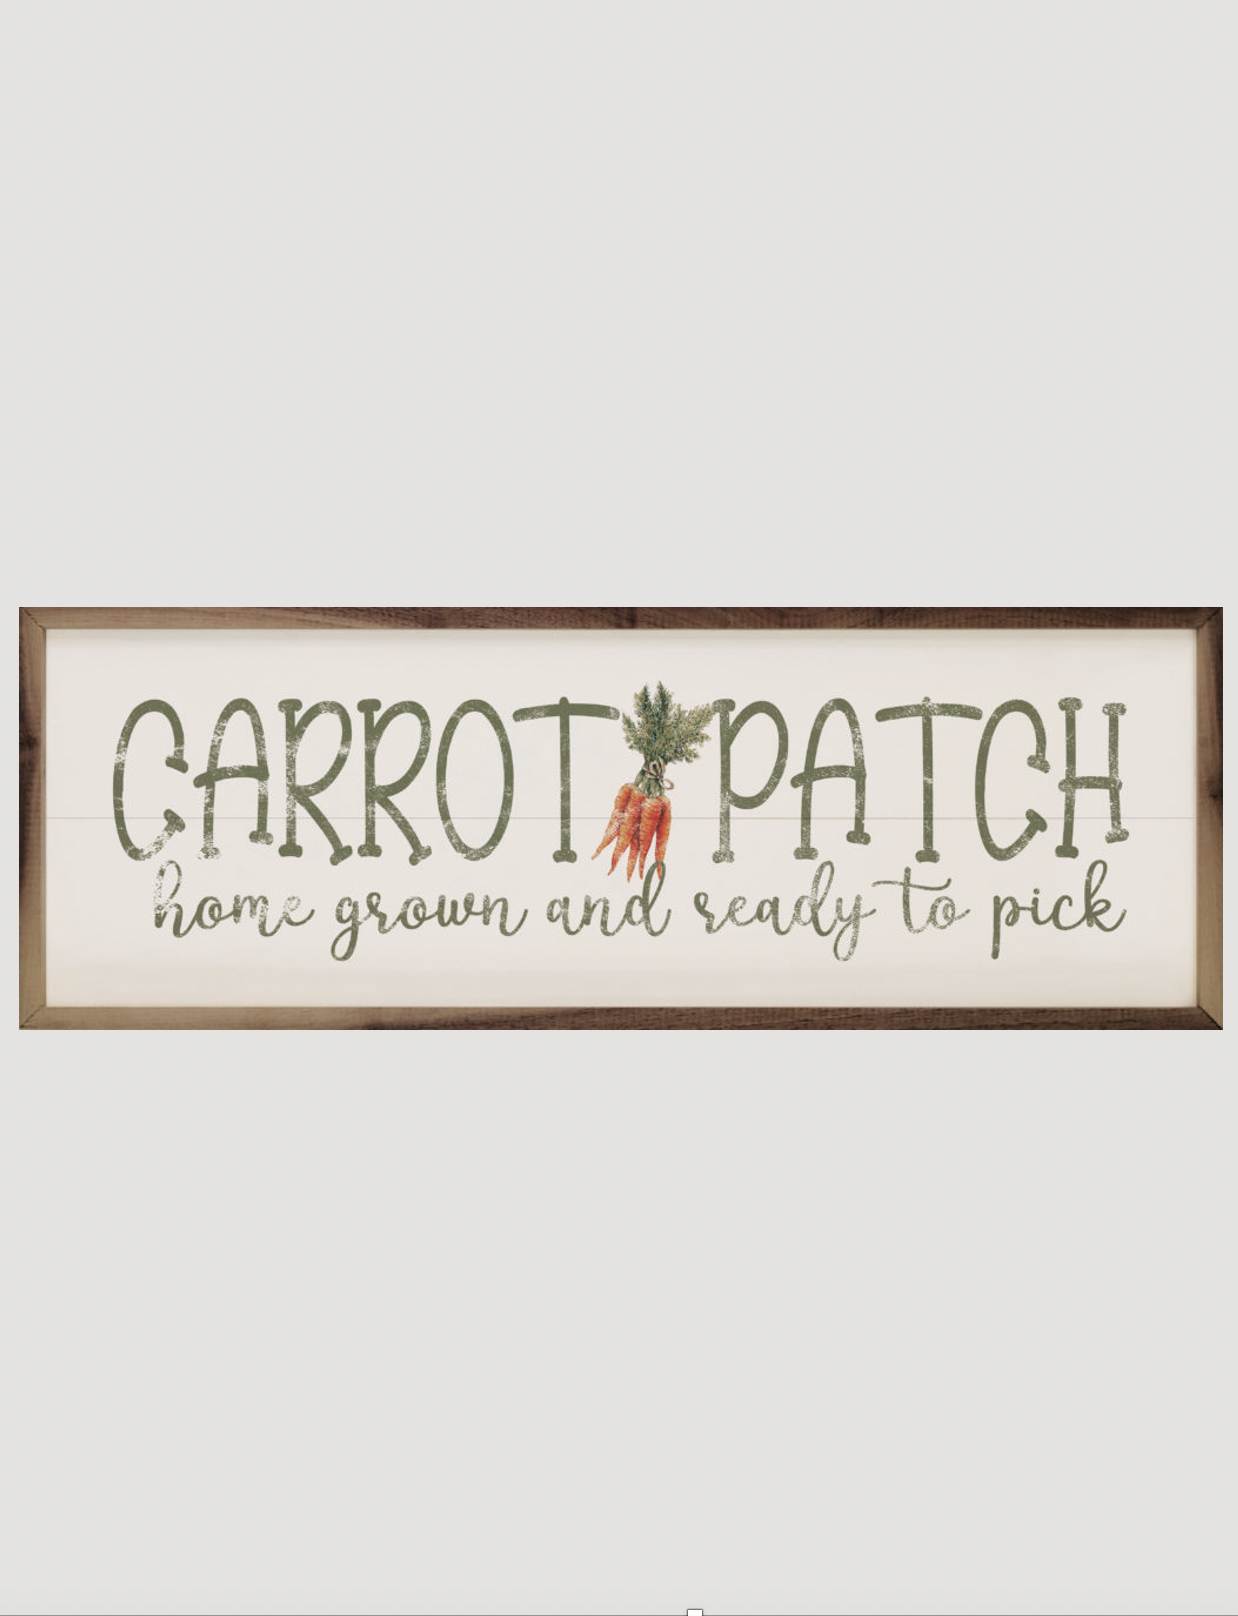 Kendrick  Home Kendrick Home Carrot Patch Home Grown Sign - 12" Brand: Kendrick  Home